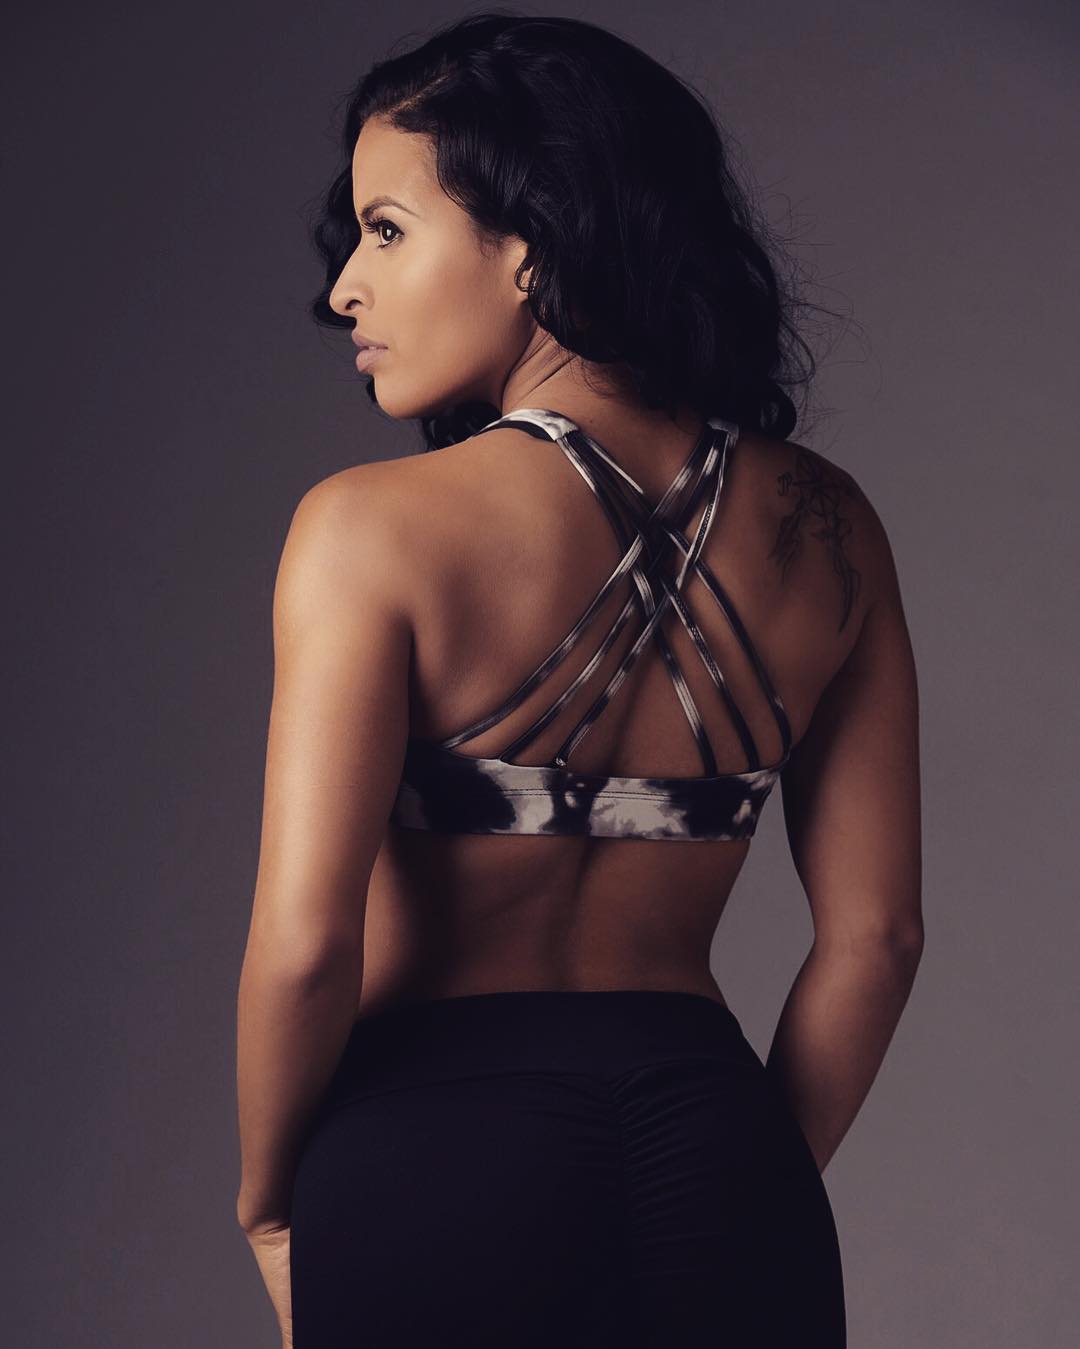 Hot Picture Of Zelina Vega Which Will Make Your Day